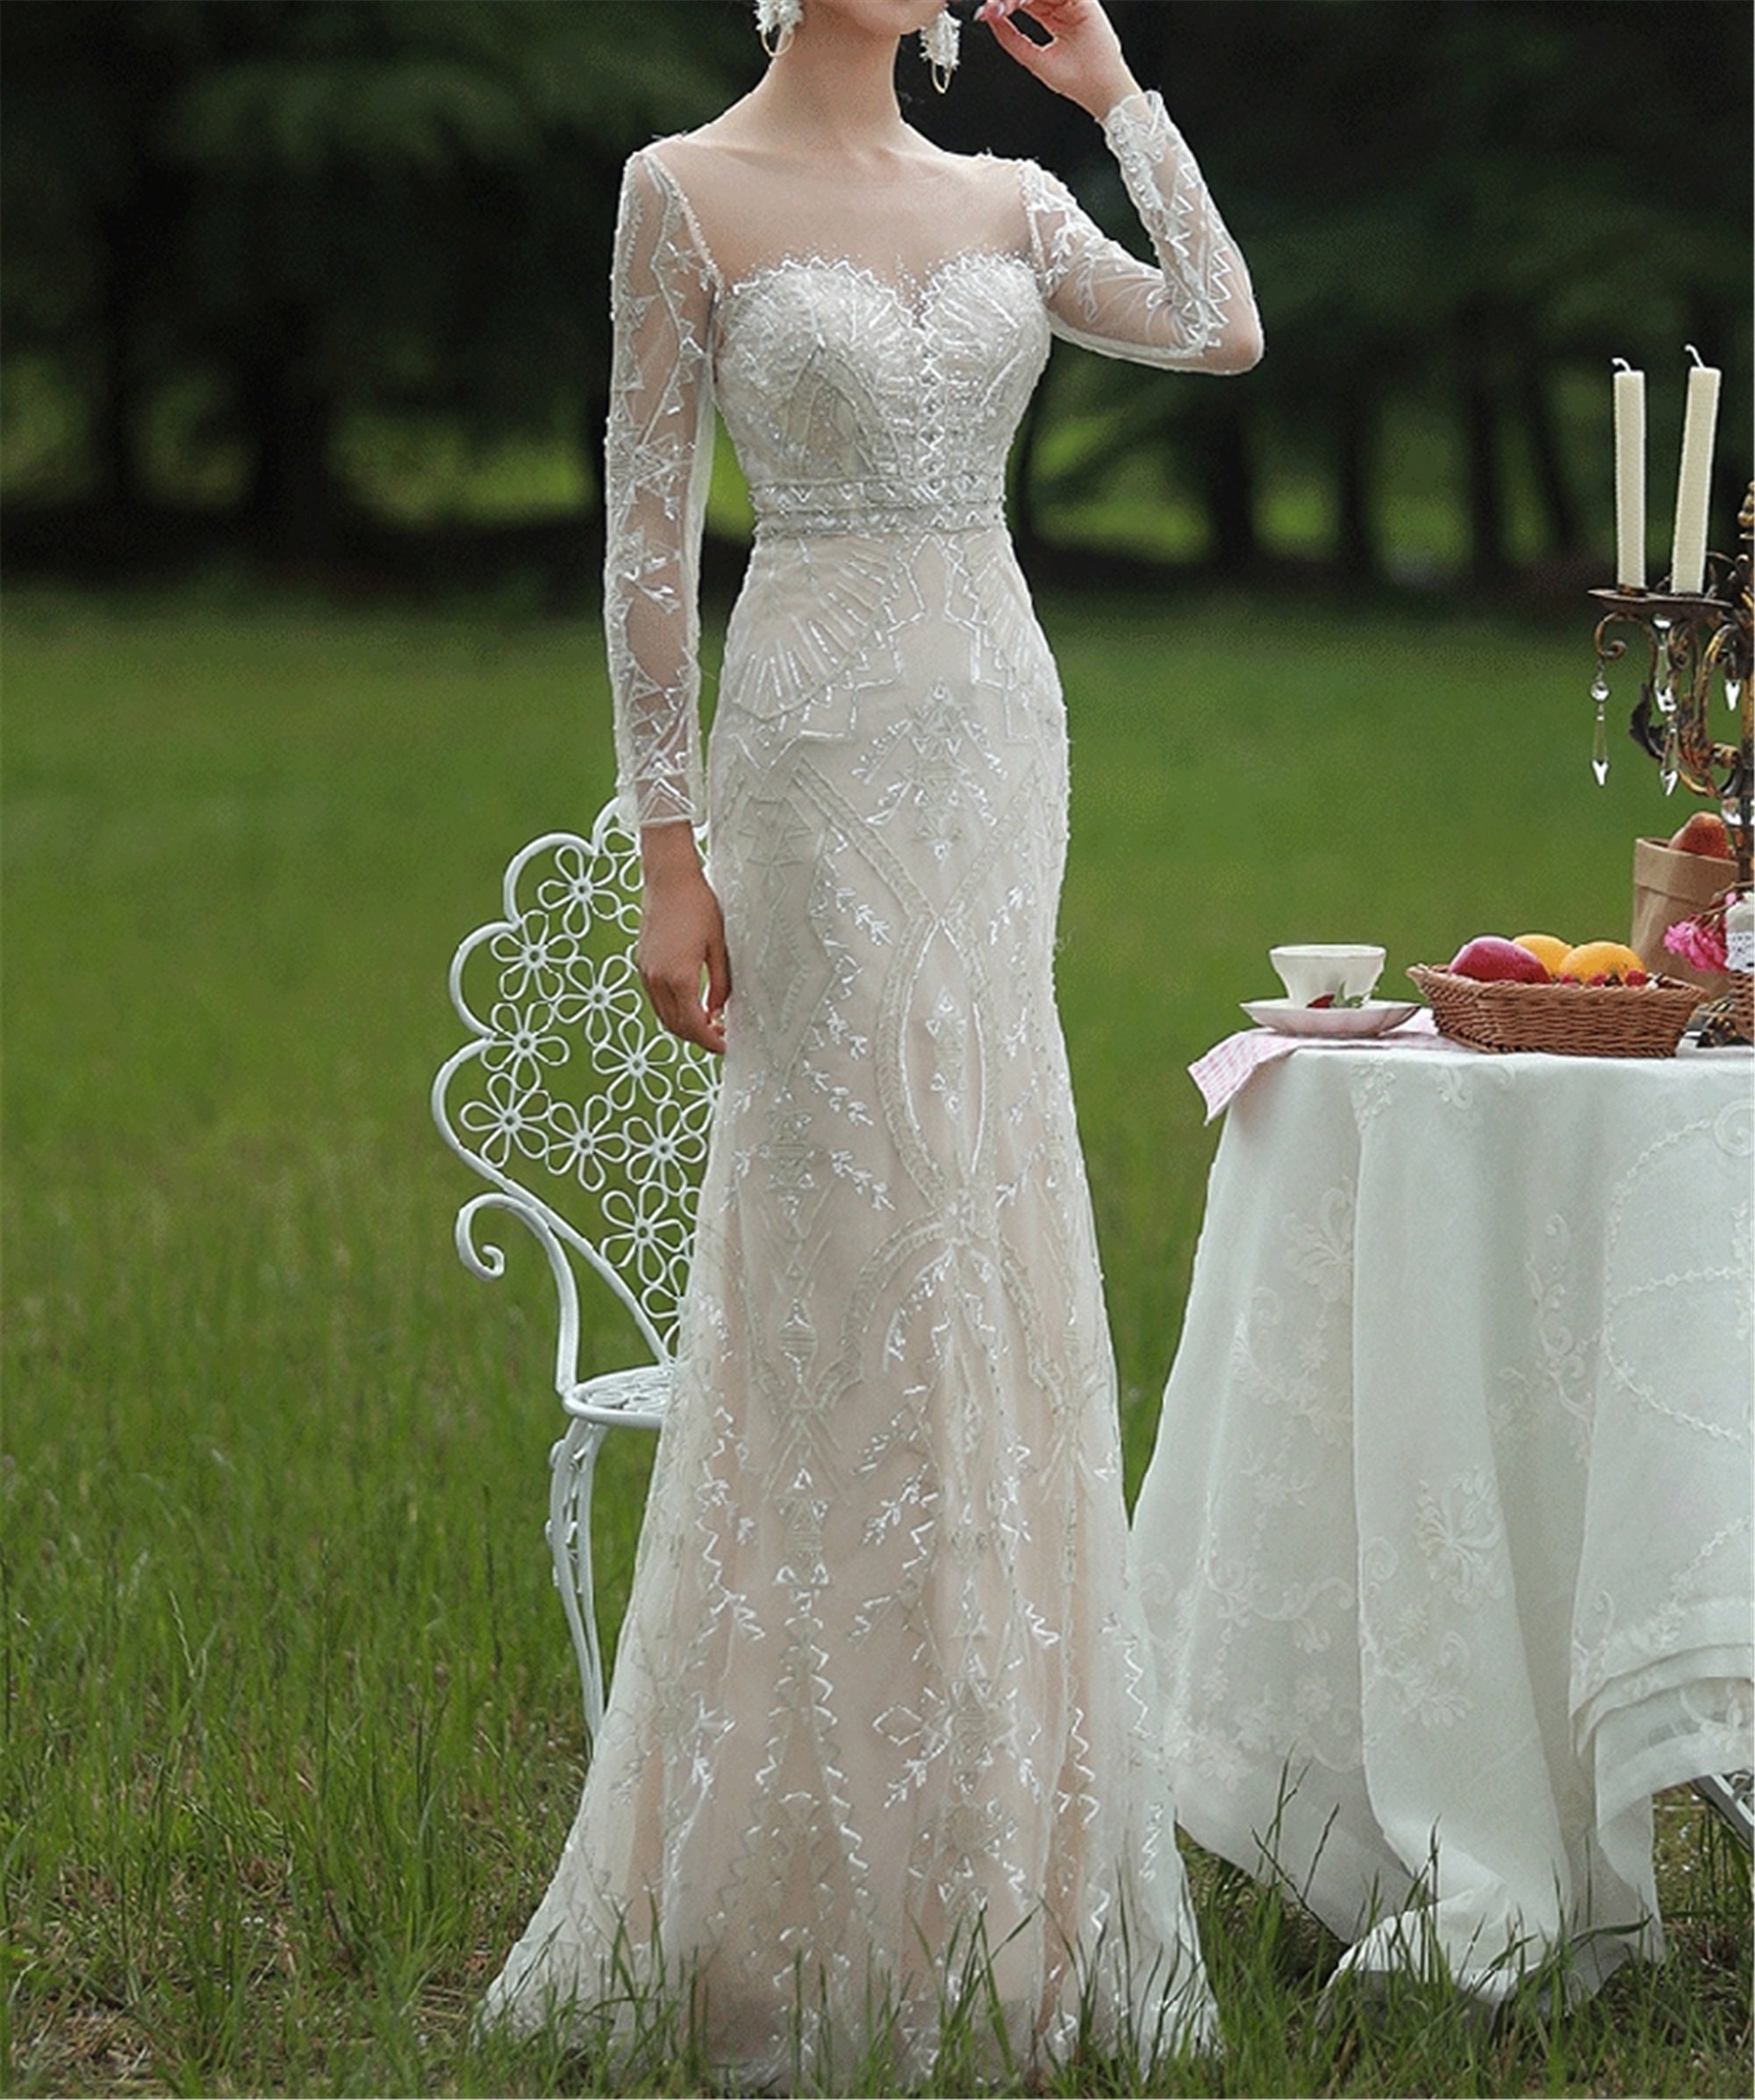 Wedding Dress Long Sleeves Mermaid Bridal Gowns Lace Bride Dresses Wedding Gown with Belt 